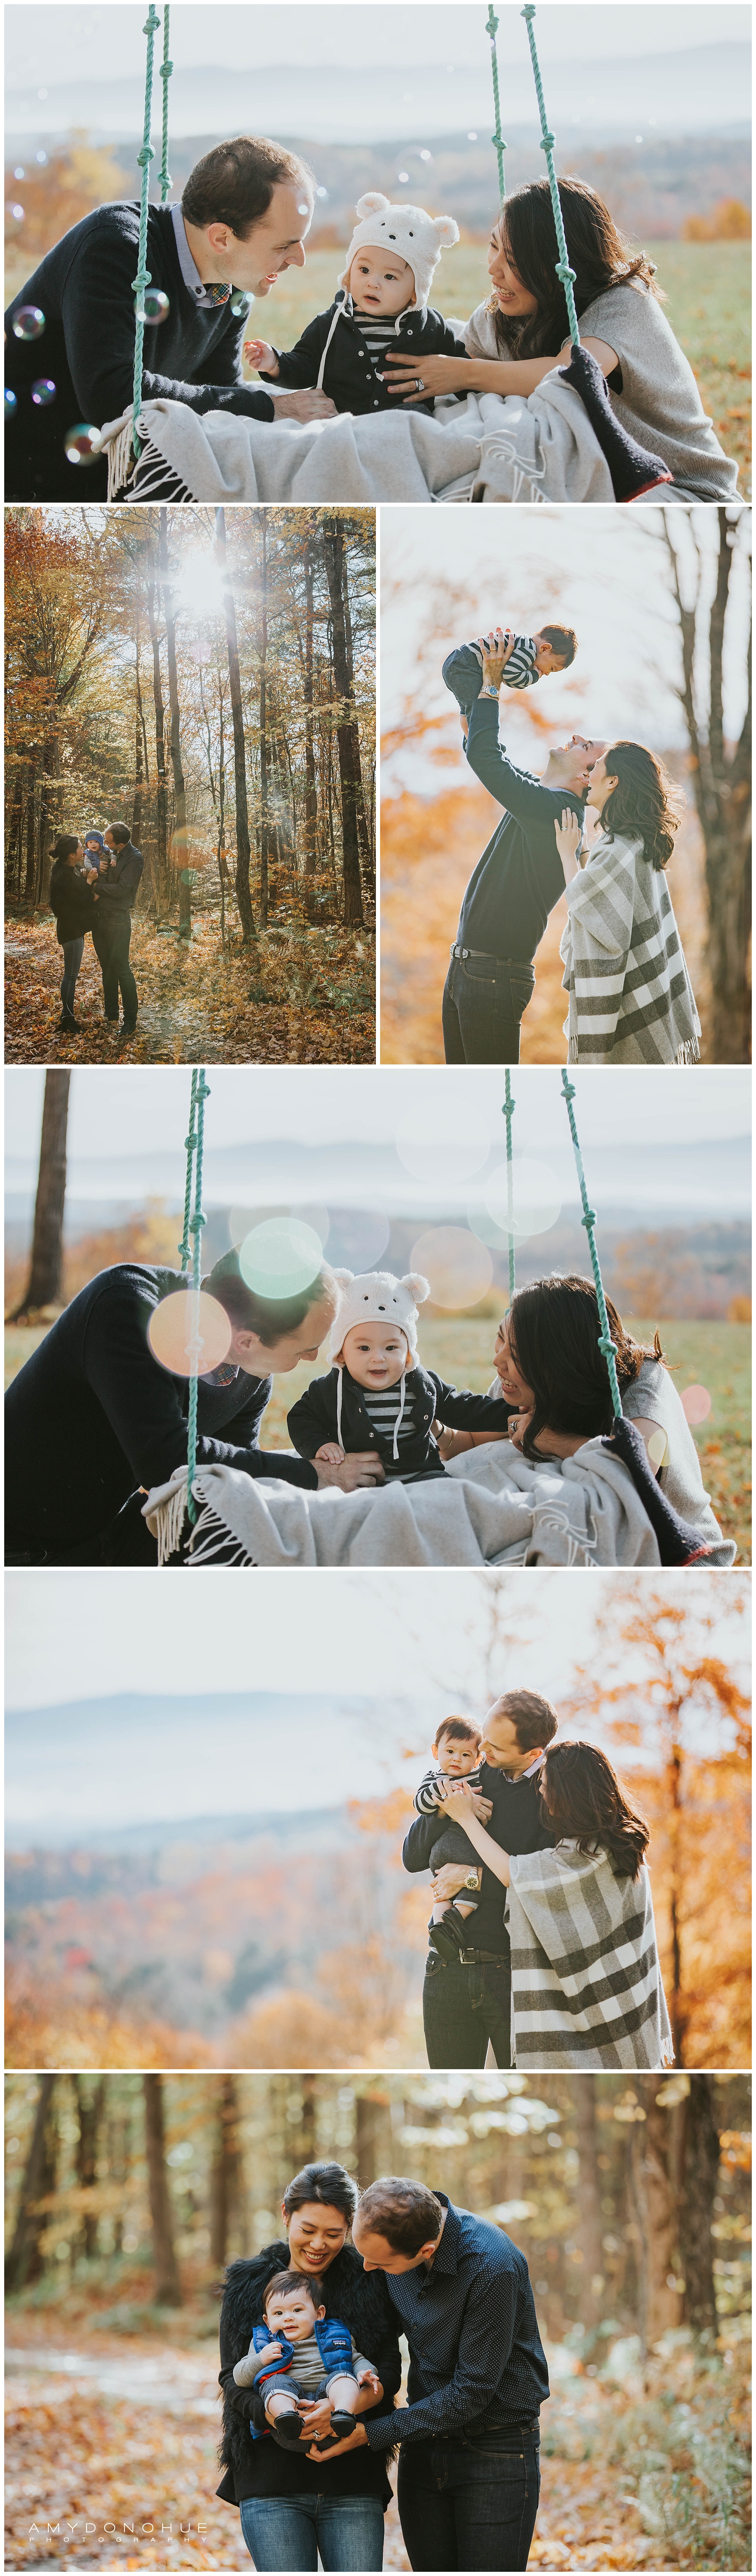 Vermont Portrait and Wedding Photographer | © Amy Donohue Photography